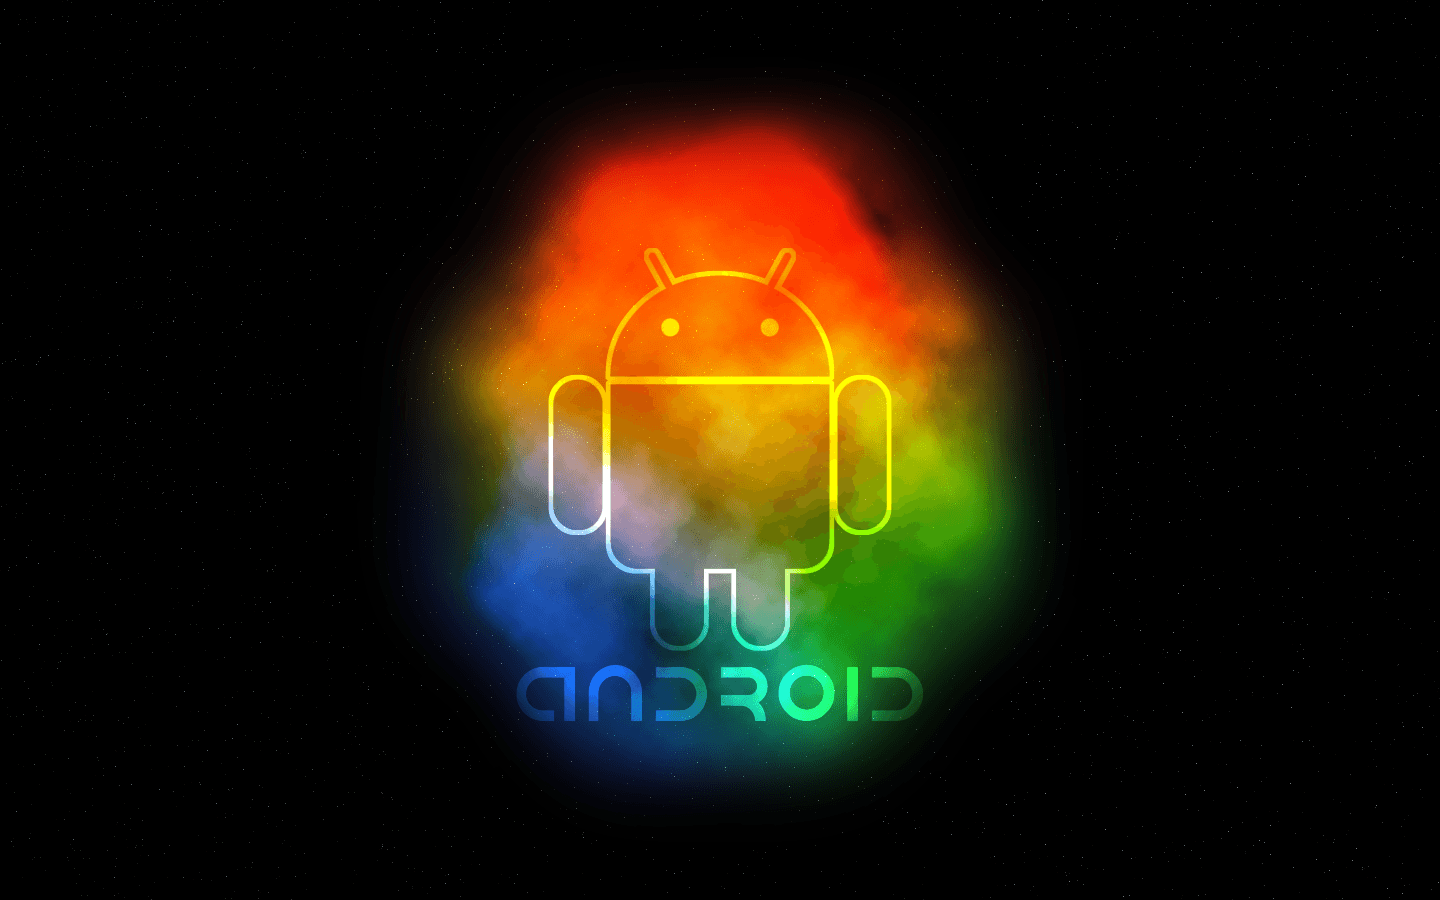 Cool Android Logo - 30 Android Wallpaper For Desktop